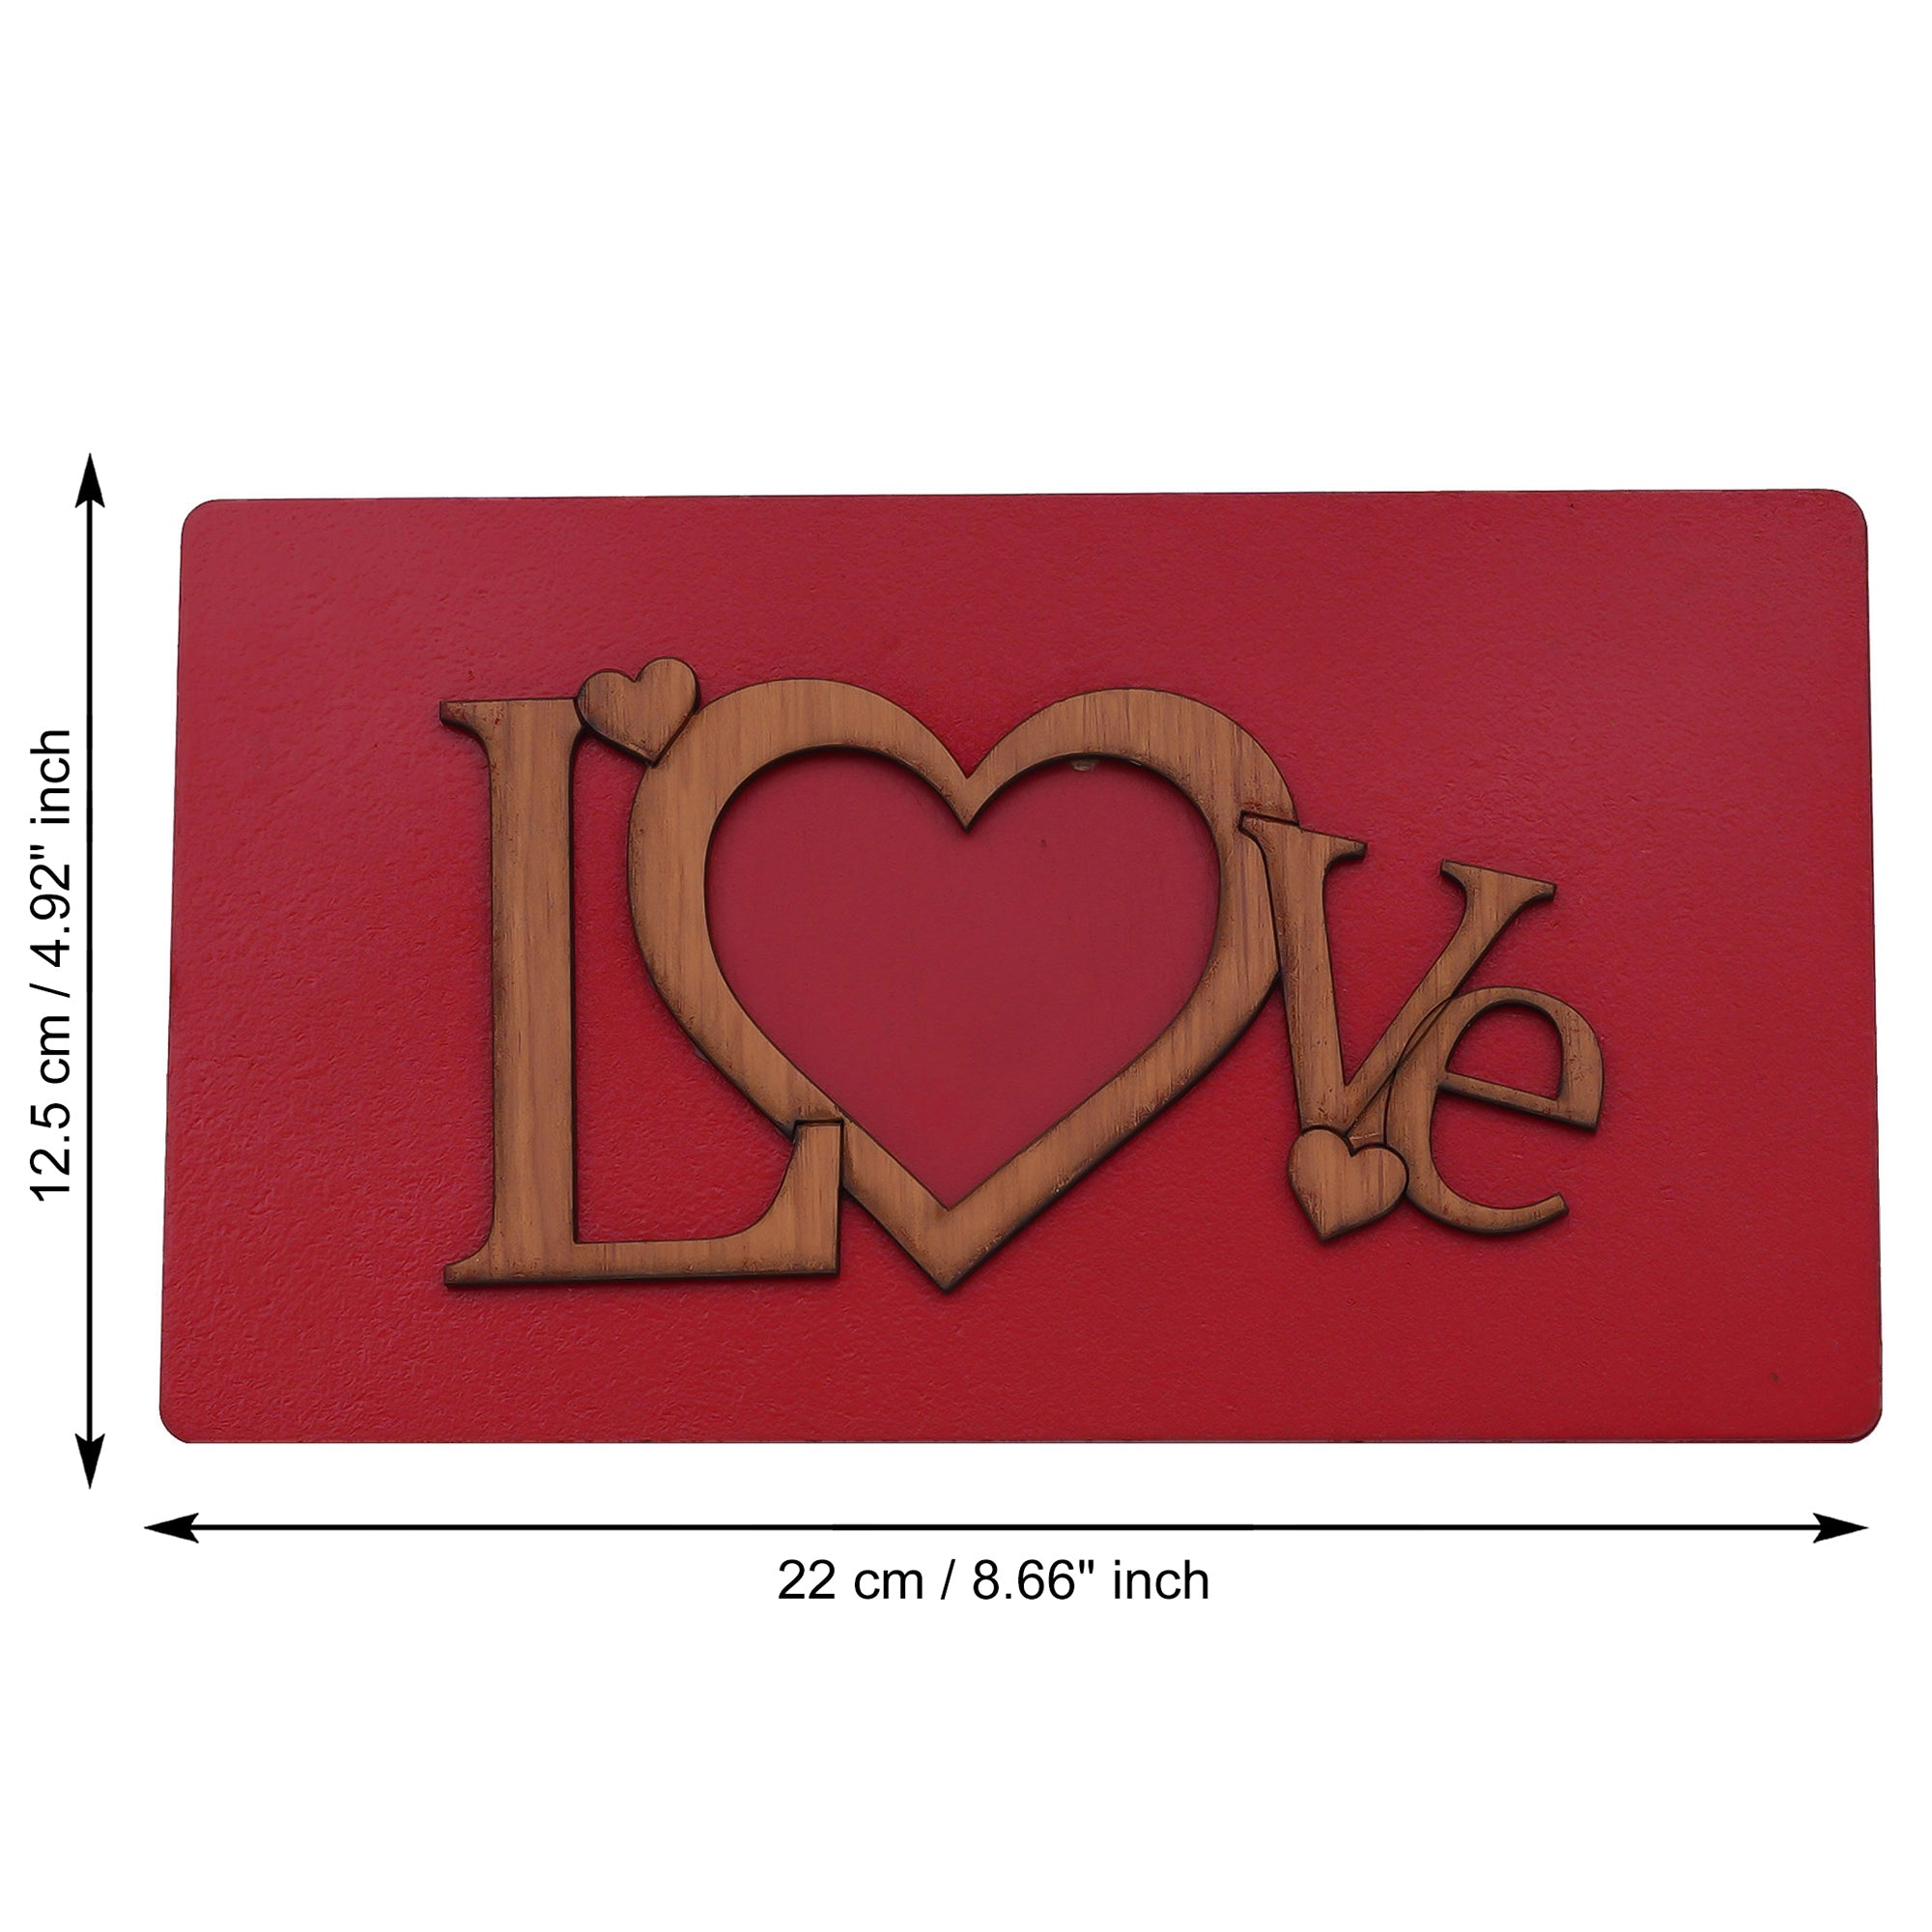 Valentine Combo of "Love" Wooden Photo Frame With Red Stand, Red Heart Shaped Gift Box 2